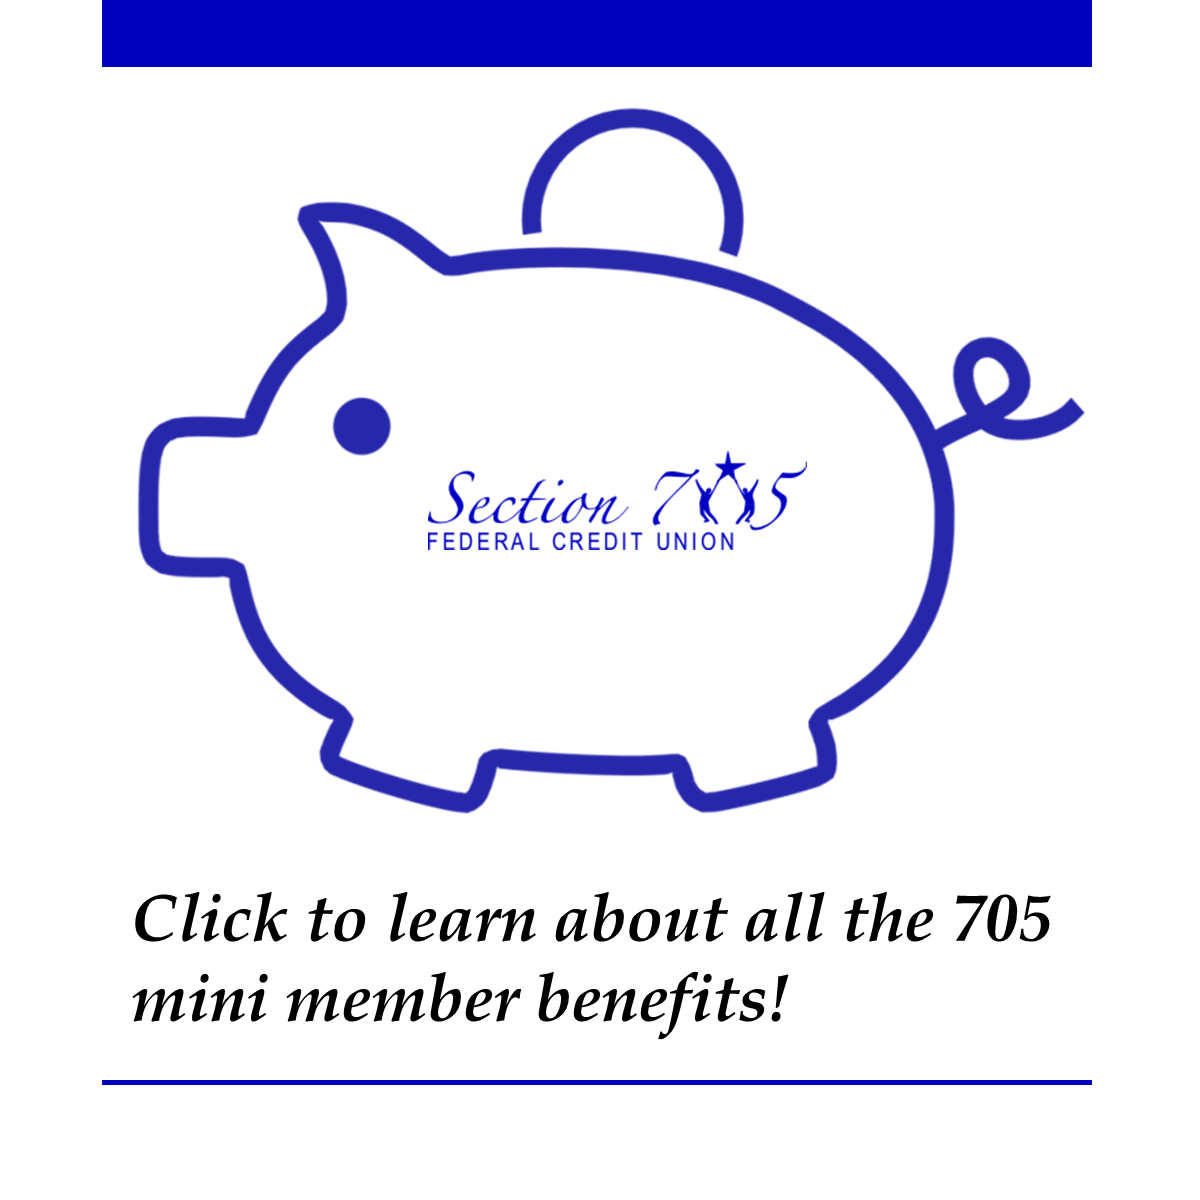 Learn more about all the 705 mini member benefits!